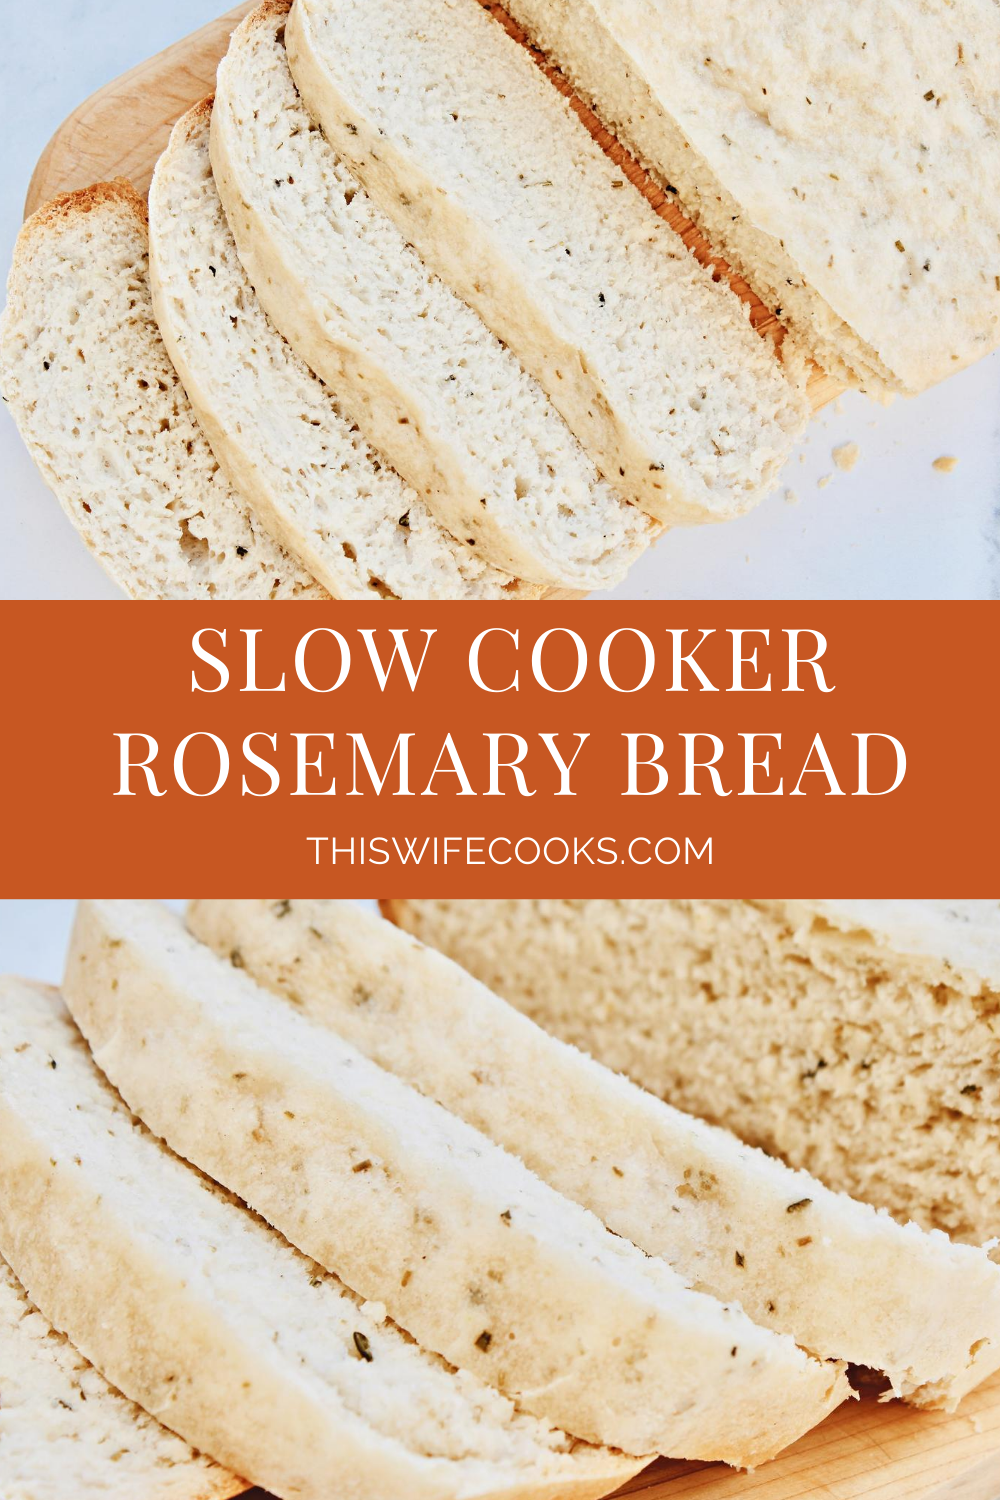 Slow Cooker Rosemary Bread ~ A savory, round loaf bread made with simple ingredients and just 2 1/2 hours in the crockpot. via @thiswifecooks